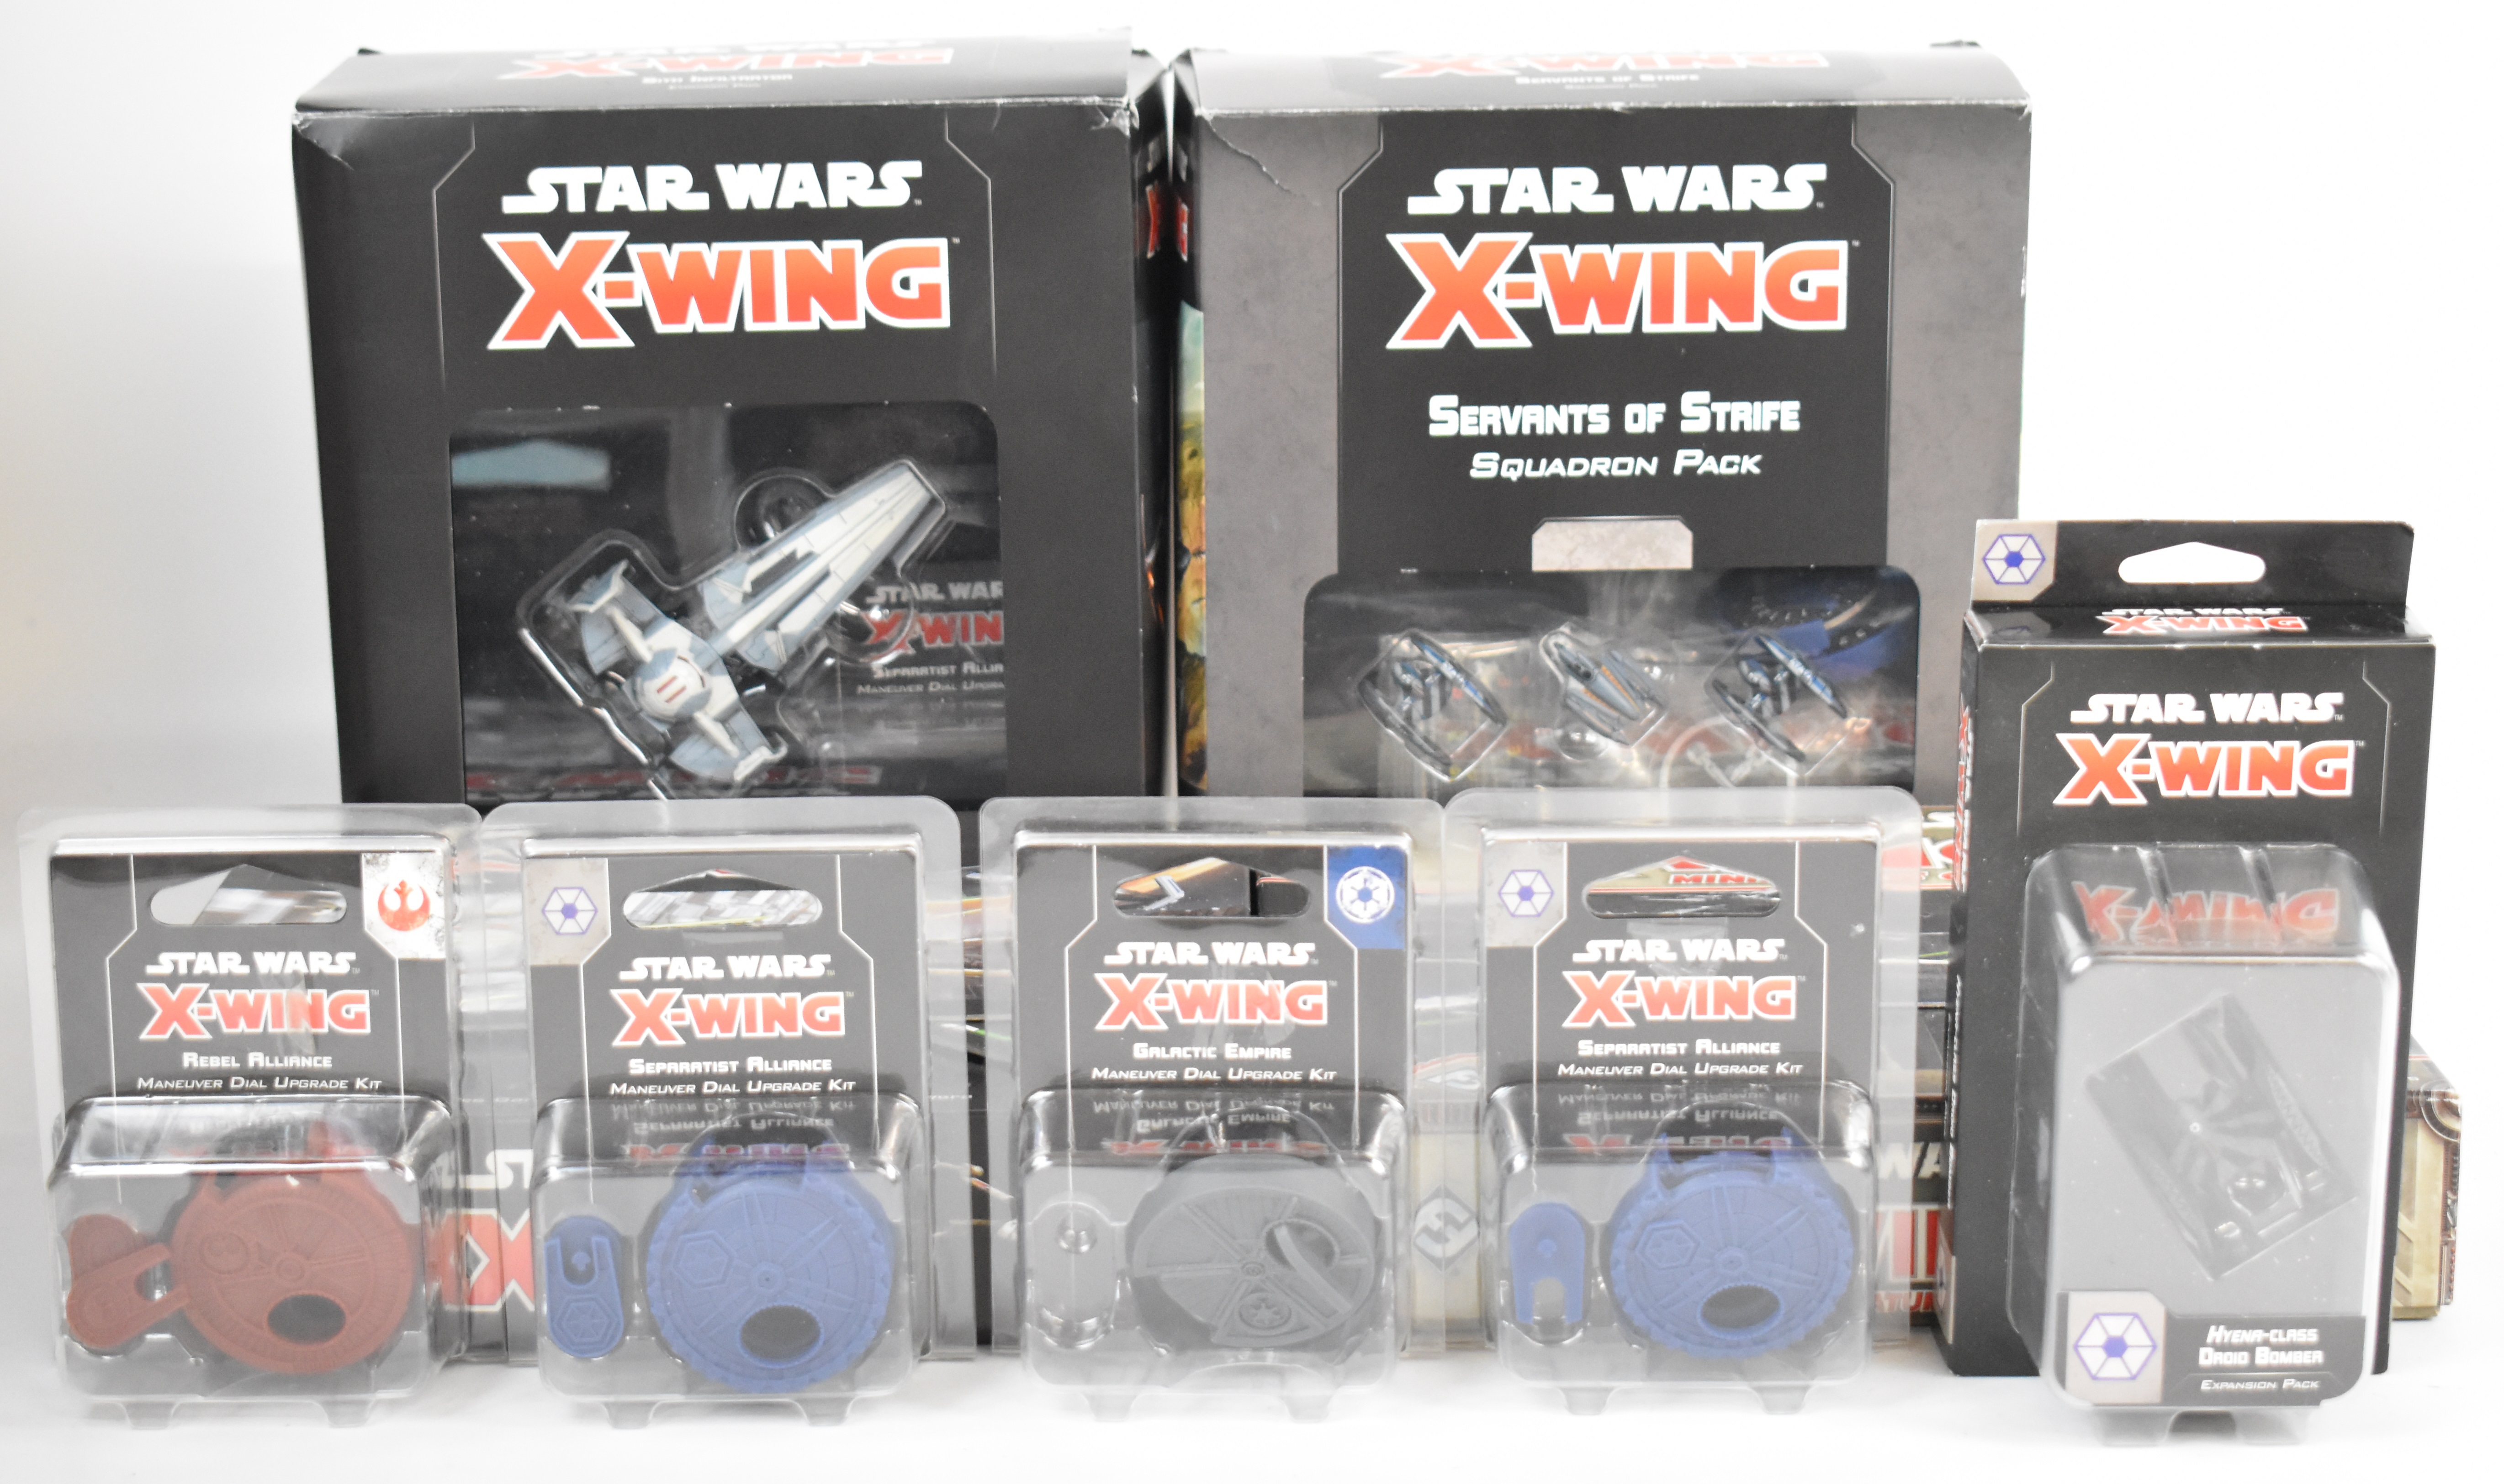 A collection of Star Wars X-Wing wargaming miniatures comprising two core base sets, Servants of